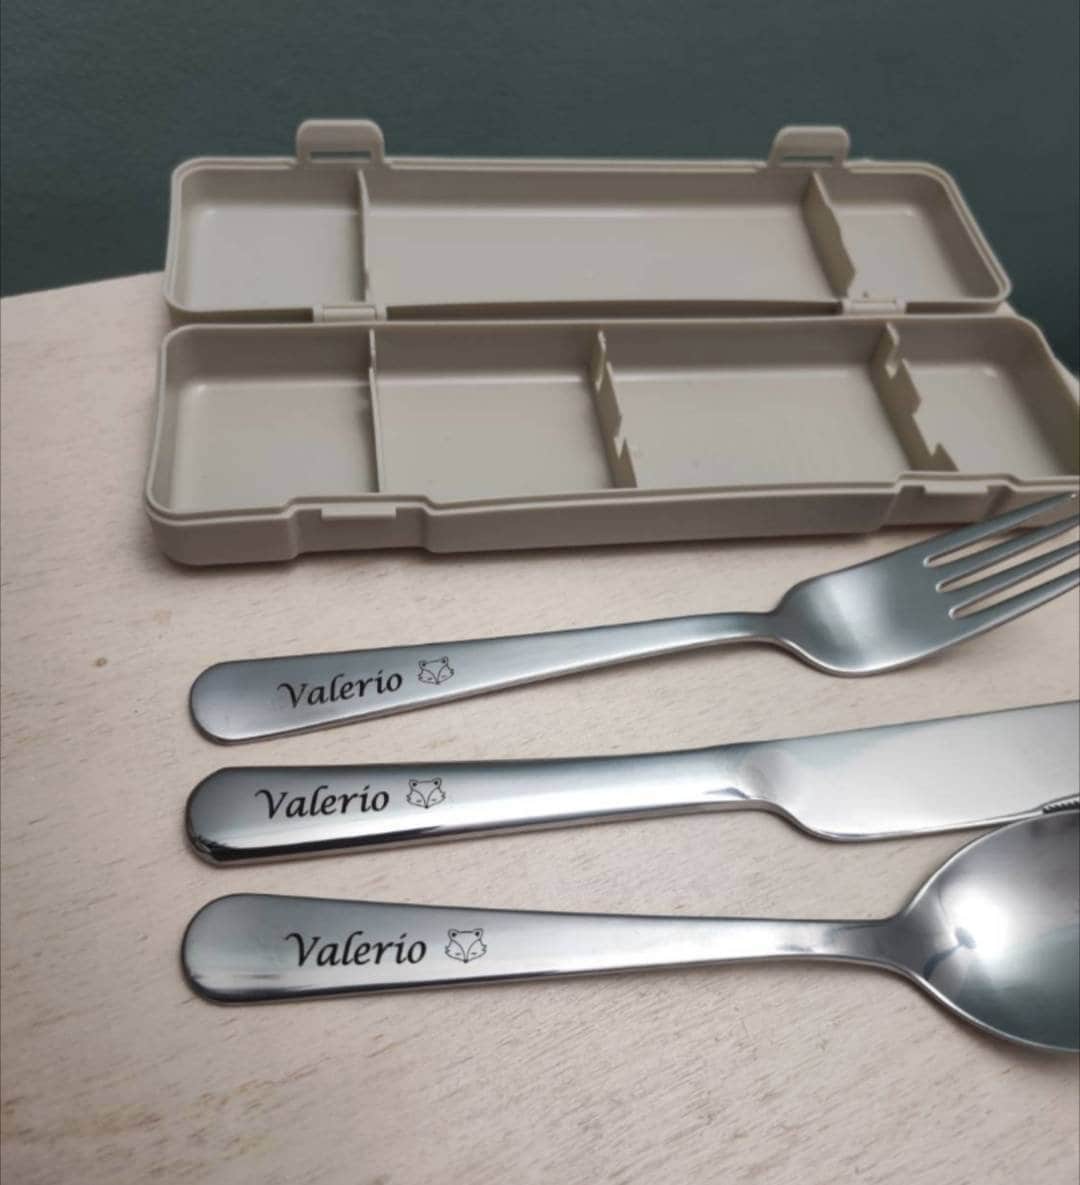 4 Sets Lunch Box Utensils Set Spoon Fork Set for Lunch Box Portable Tableware Set with Case, Size: 21.5X5.8cm